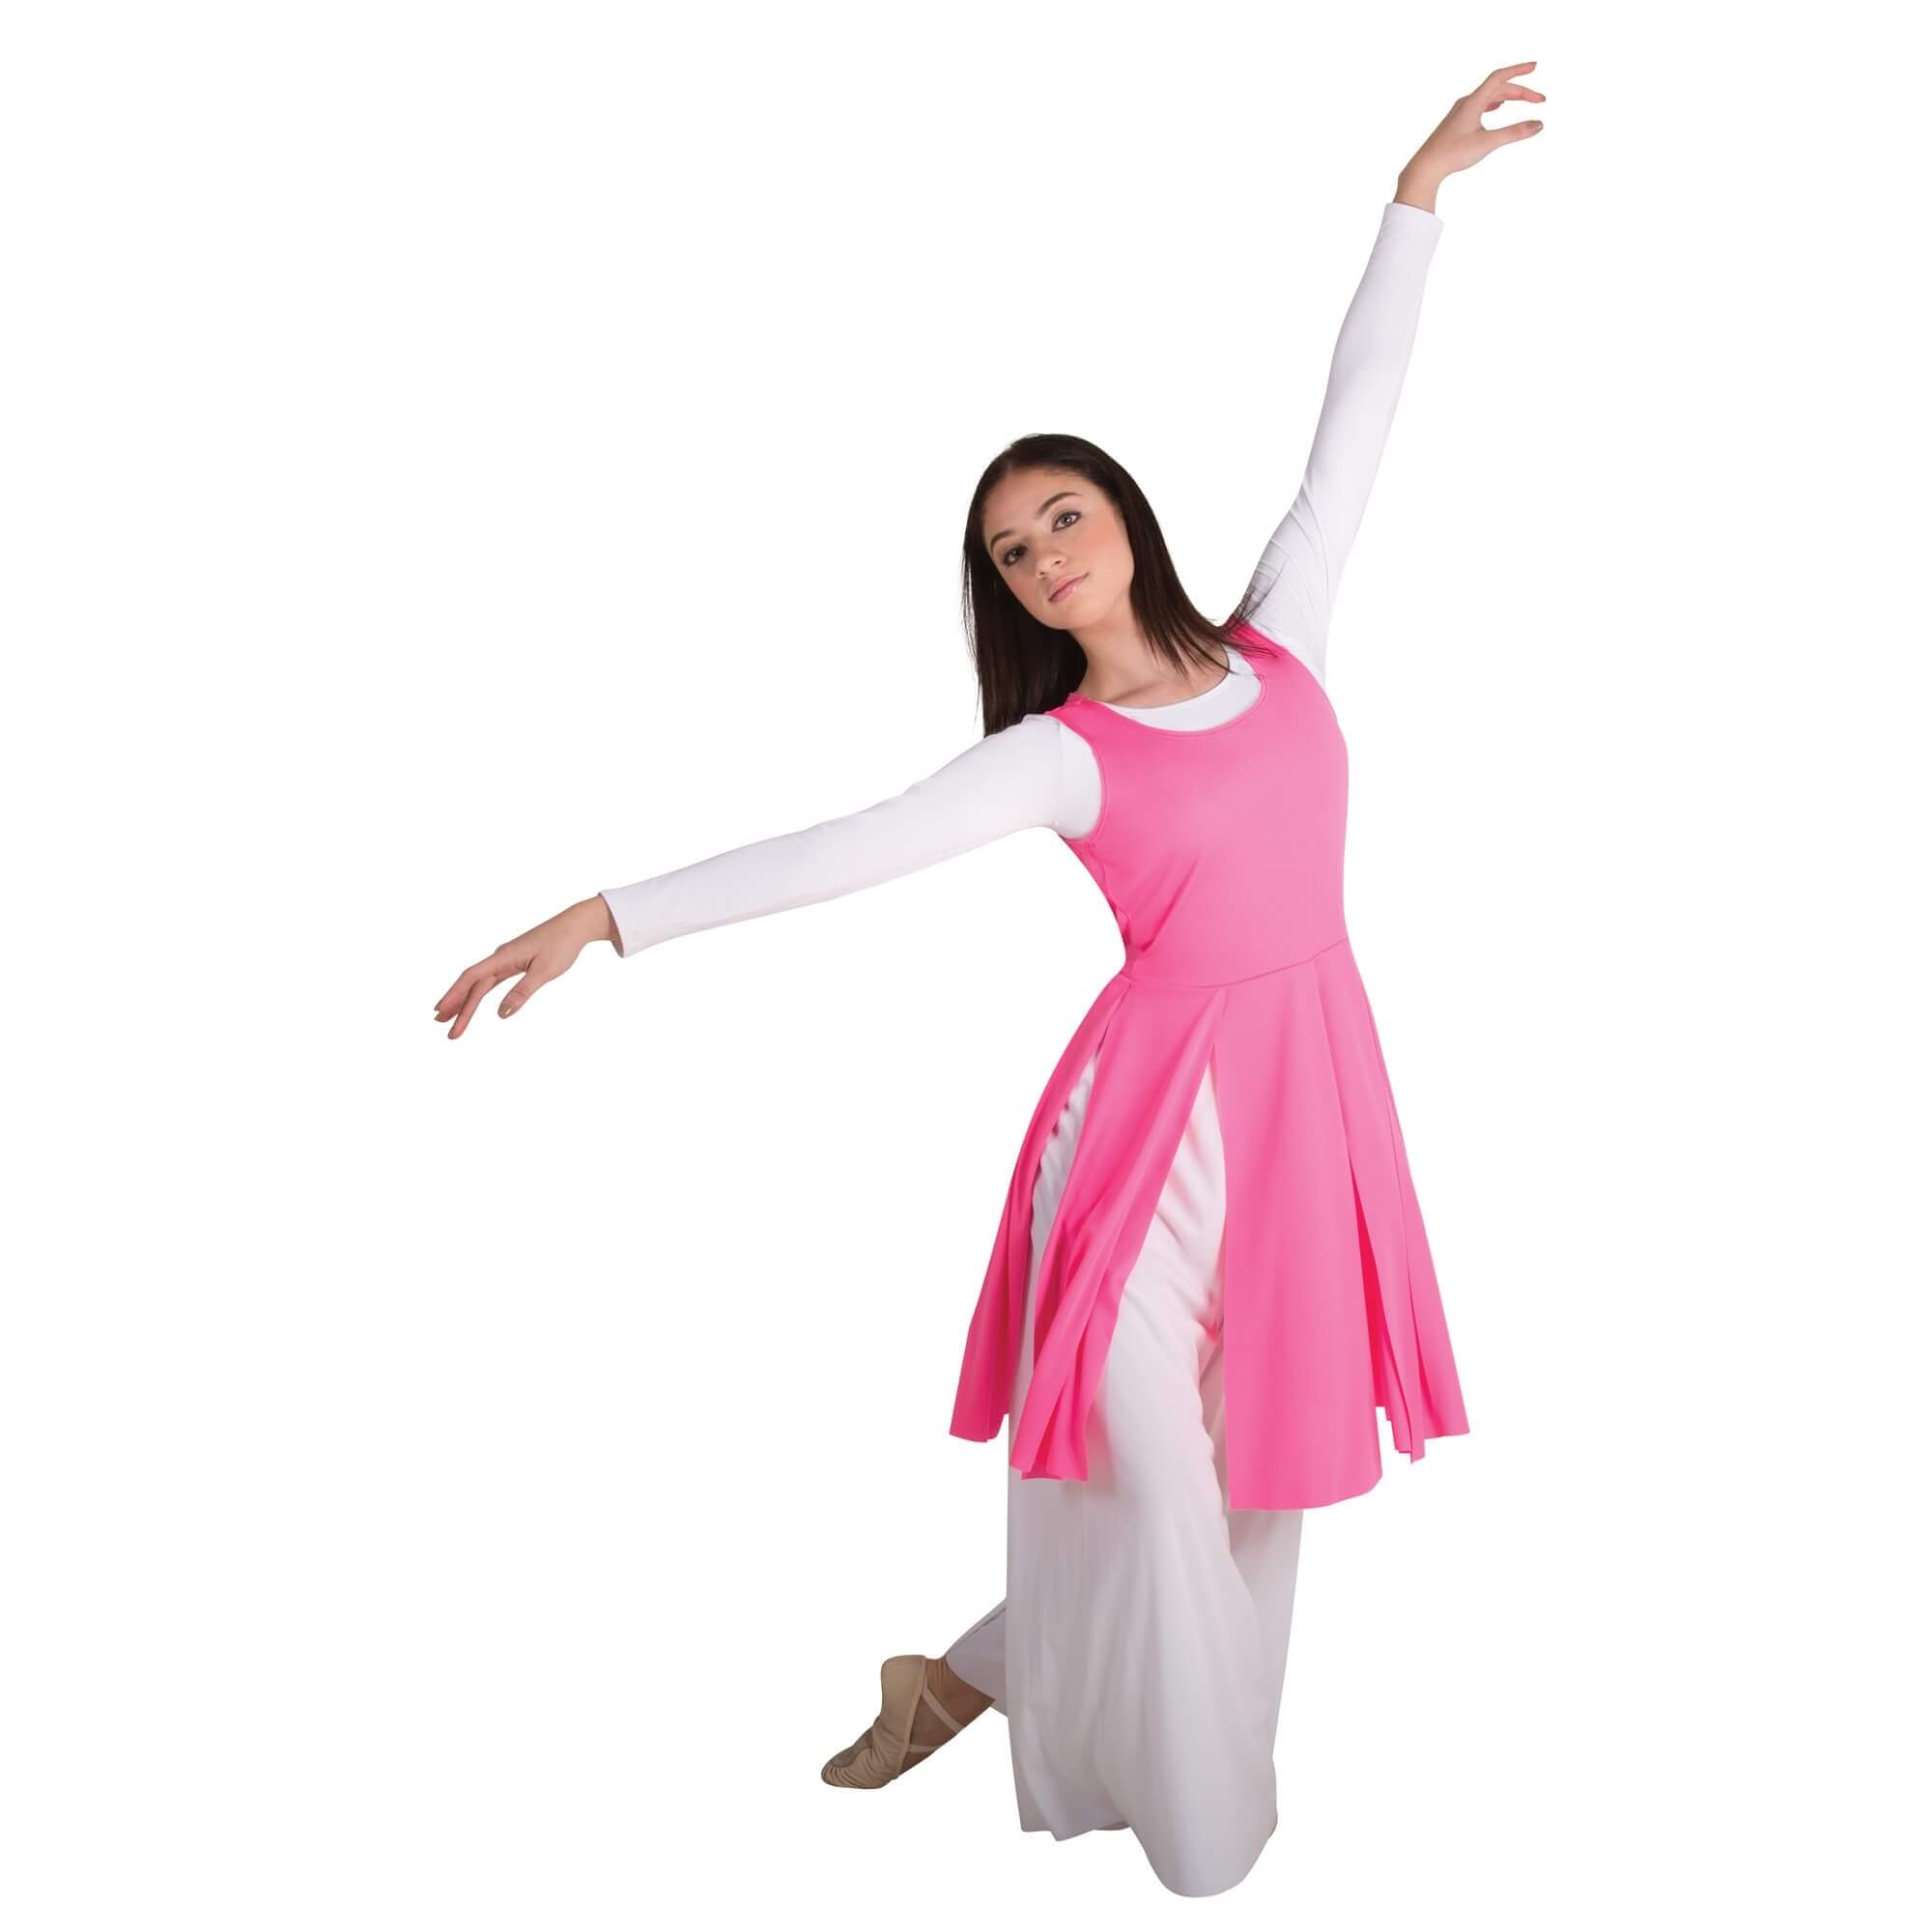 Body Wrappers Liturgical Dance Fly-Away Panel Tunic [BWP608] - $24.99